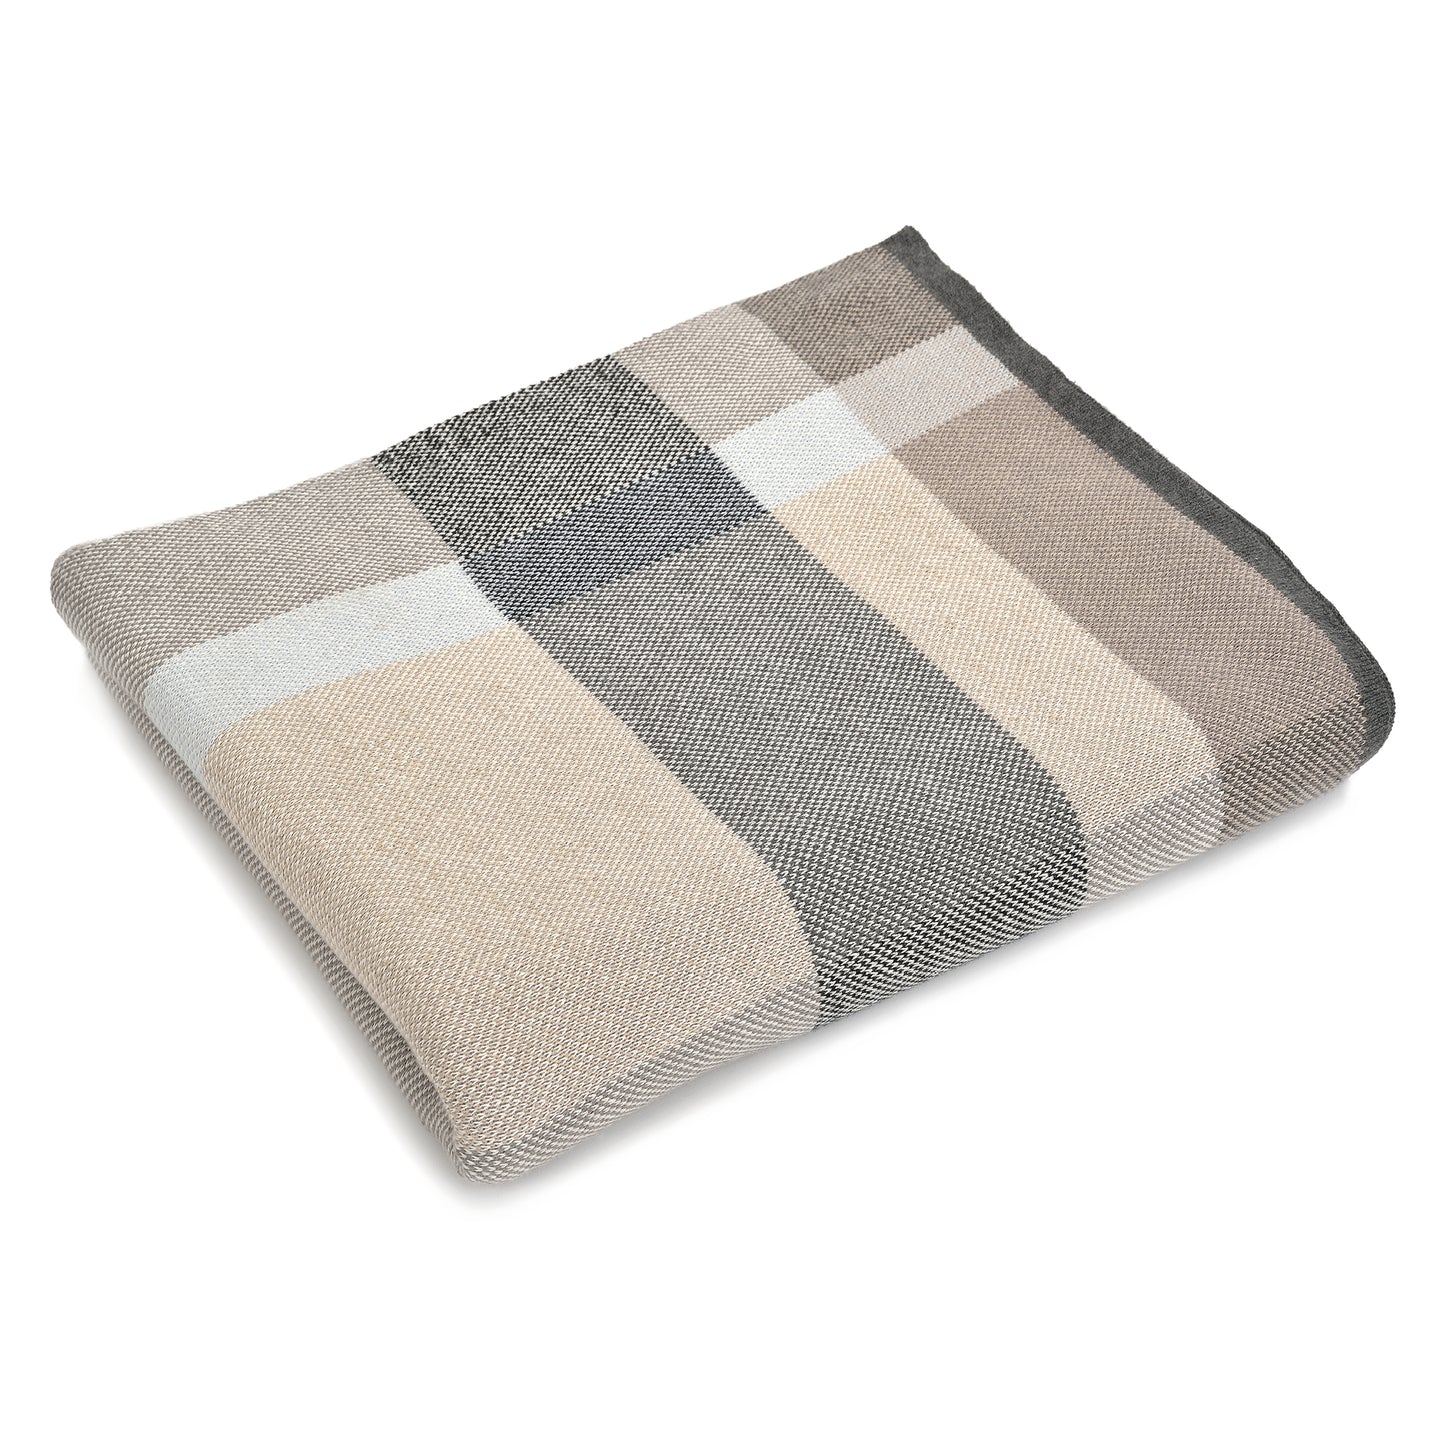 Rory Plaid Pillow and Throw Set - Beige